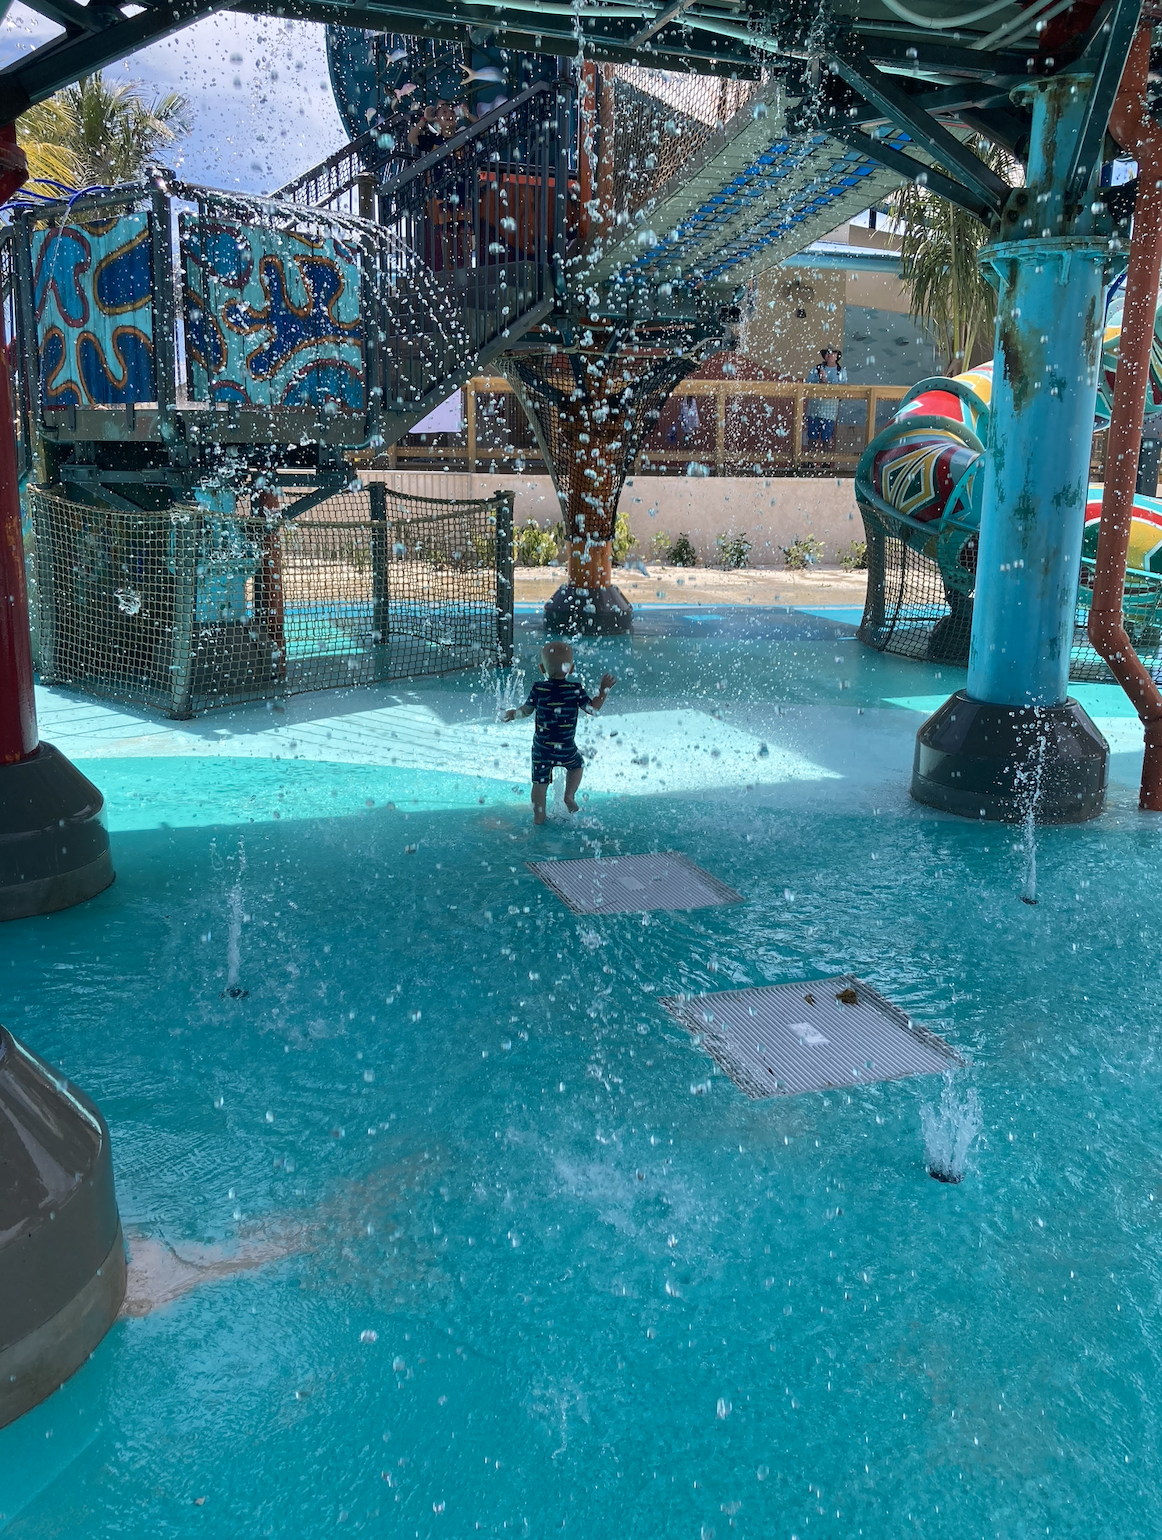 A child is playing under sprinklers in a water playground with colorful, interactive structures around